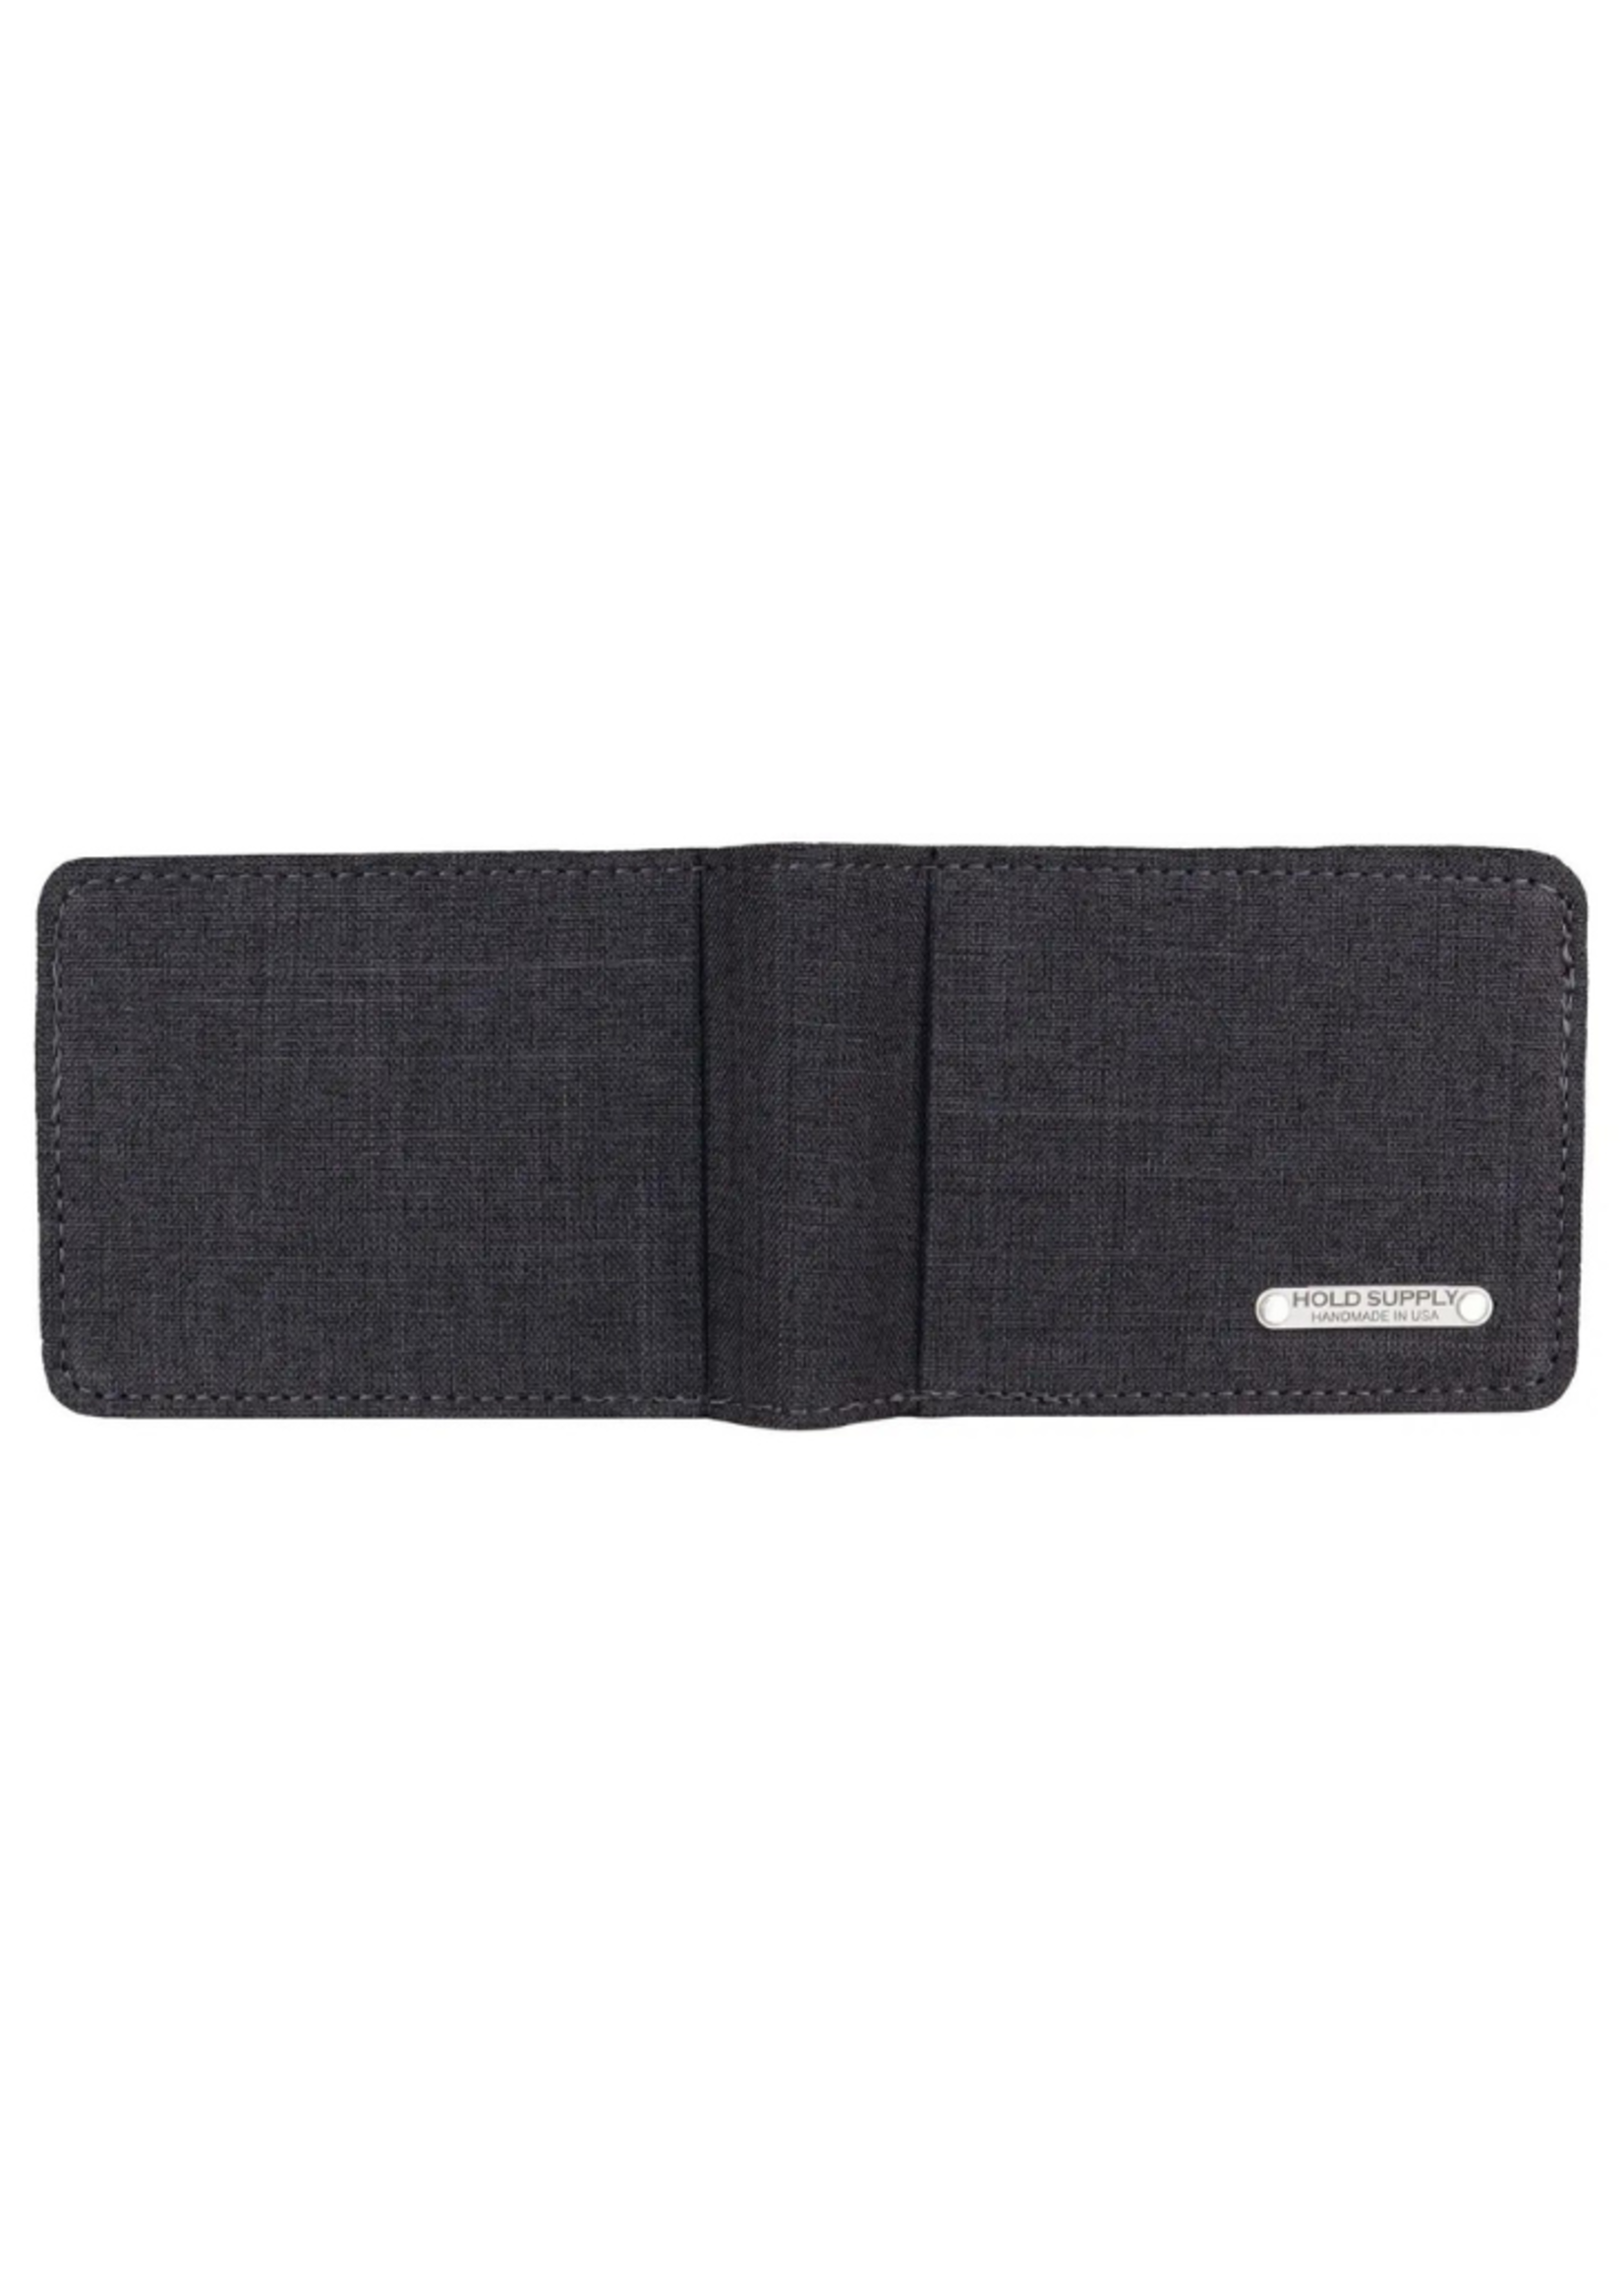 Hold Supply Co Gray Fabric Bifold Wallet